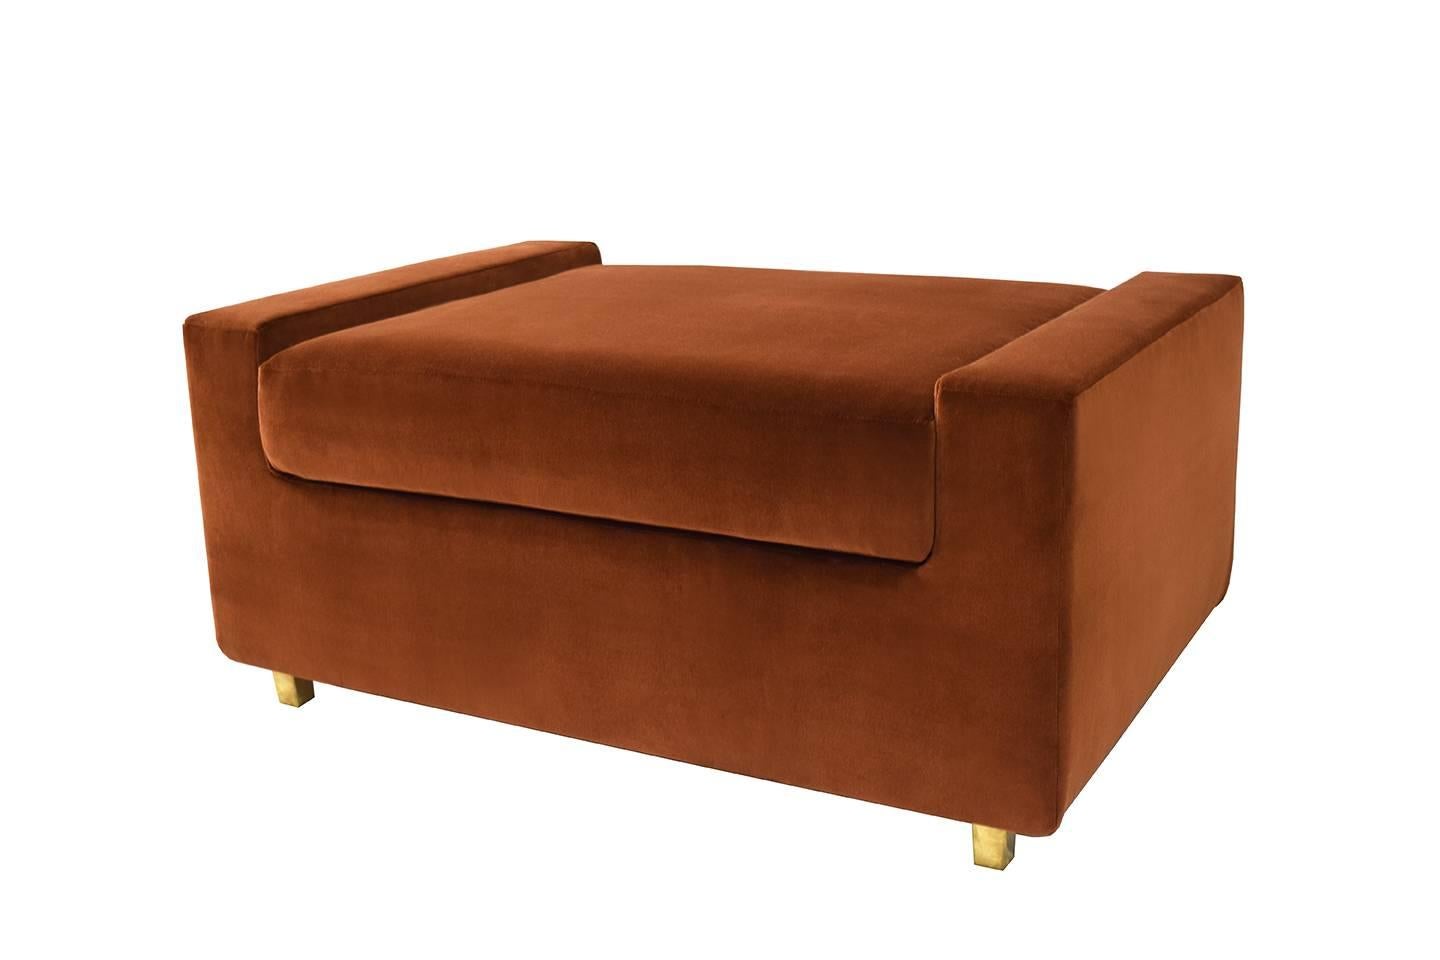 The Brighton Ottoman, designed by Irwin Feld Design for CF MODERN, is a prime example of simplicity done right. Shown here in an 